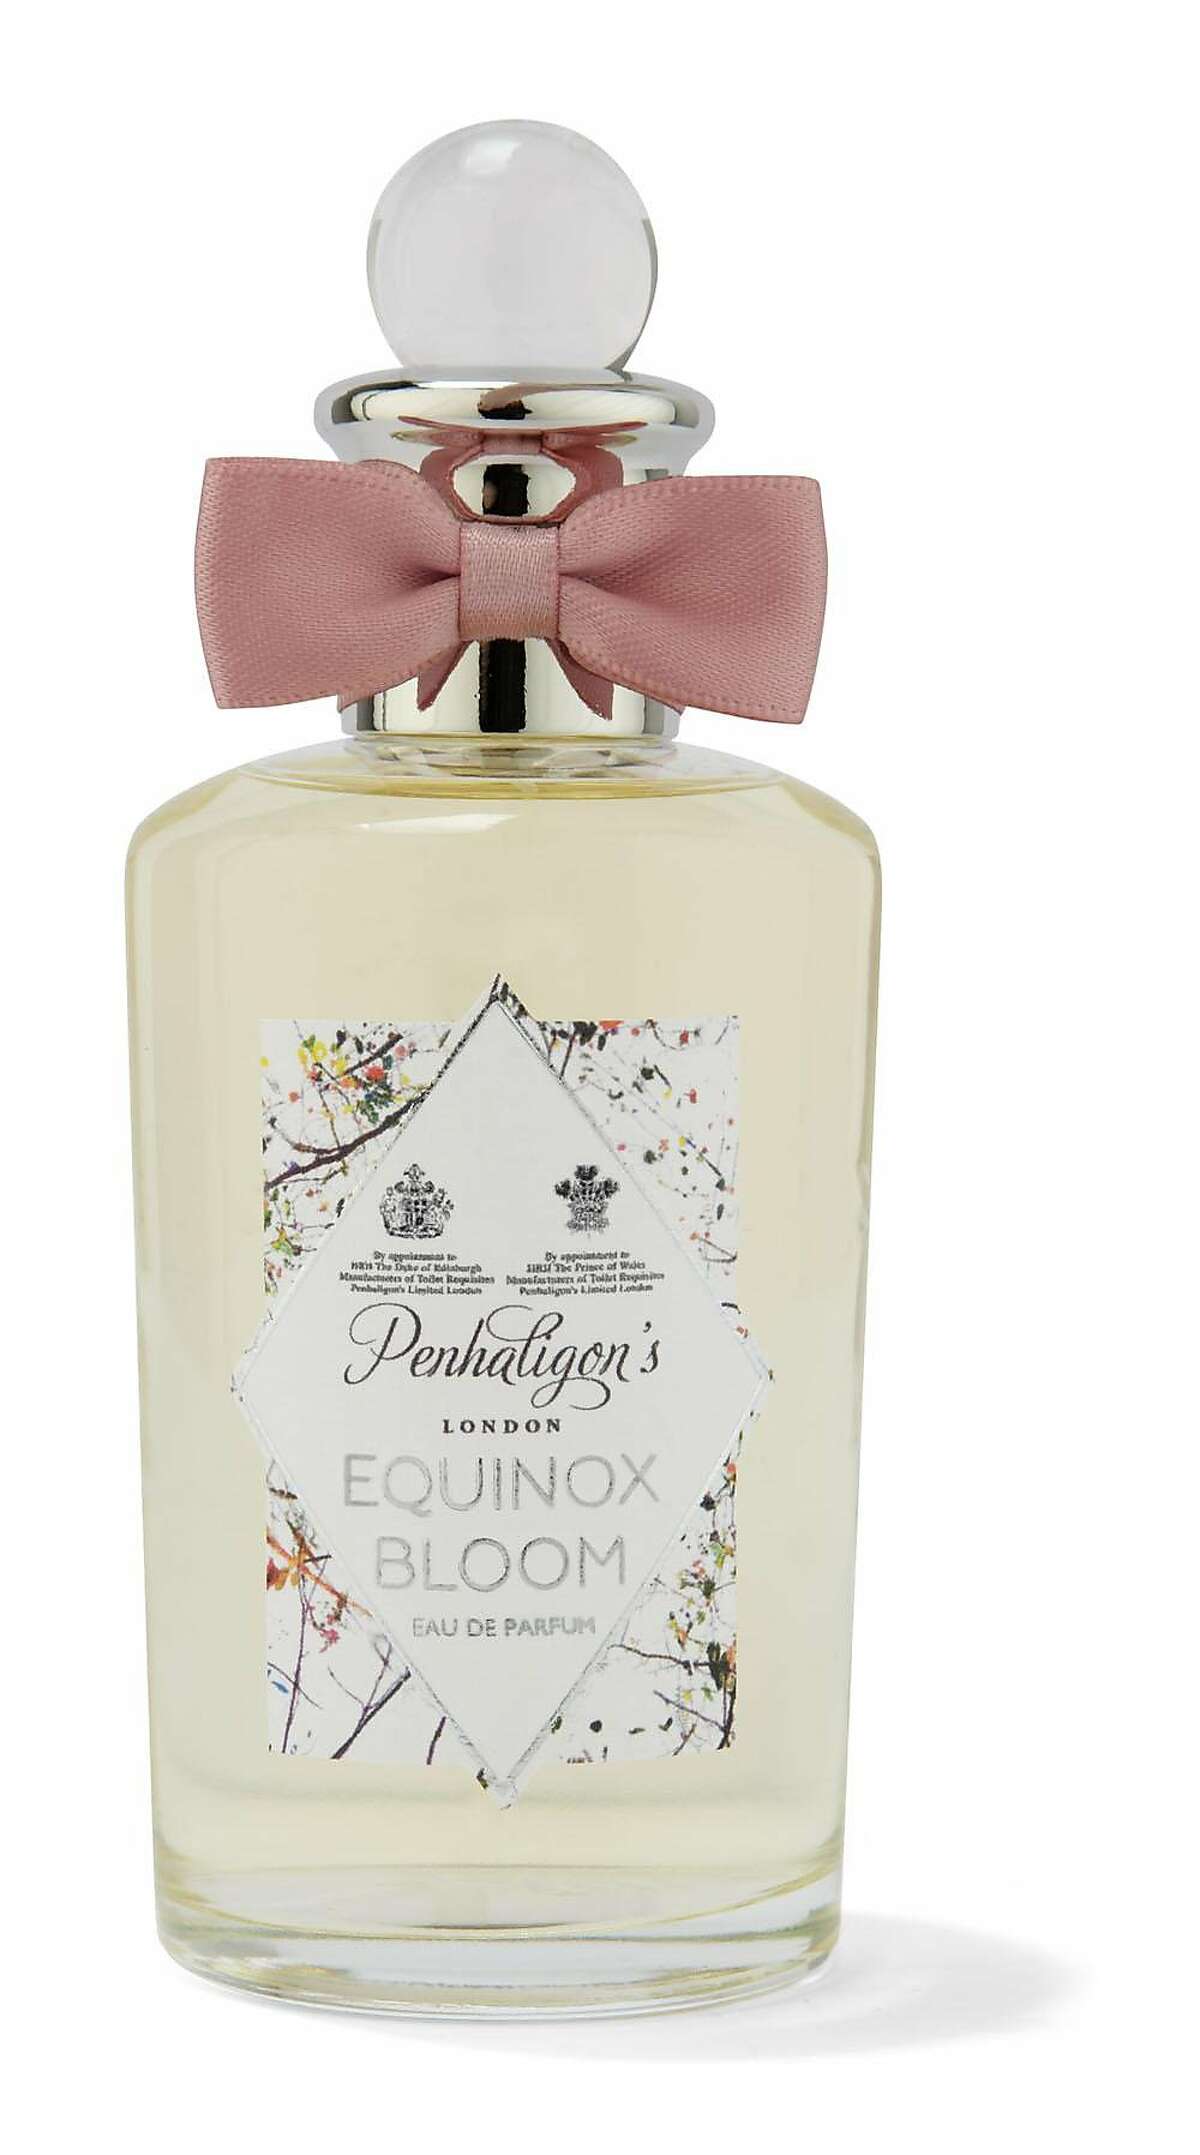 Fresh spring scents